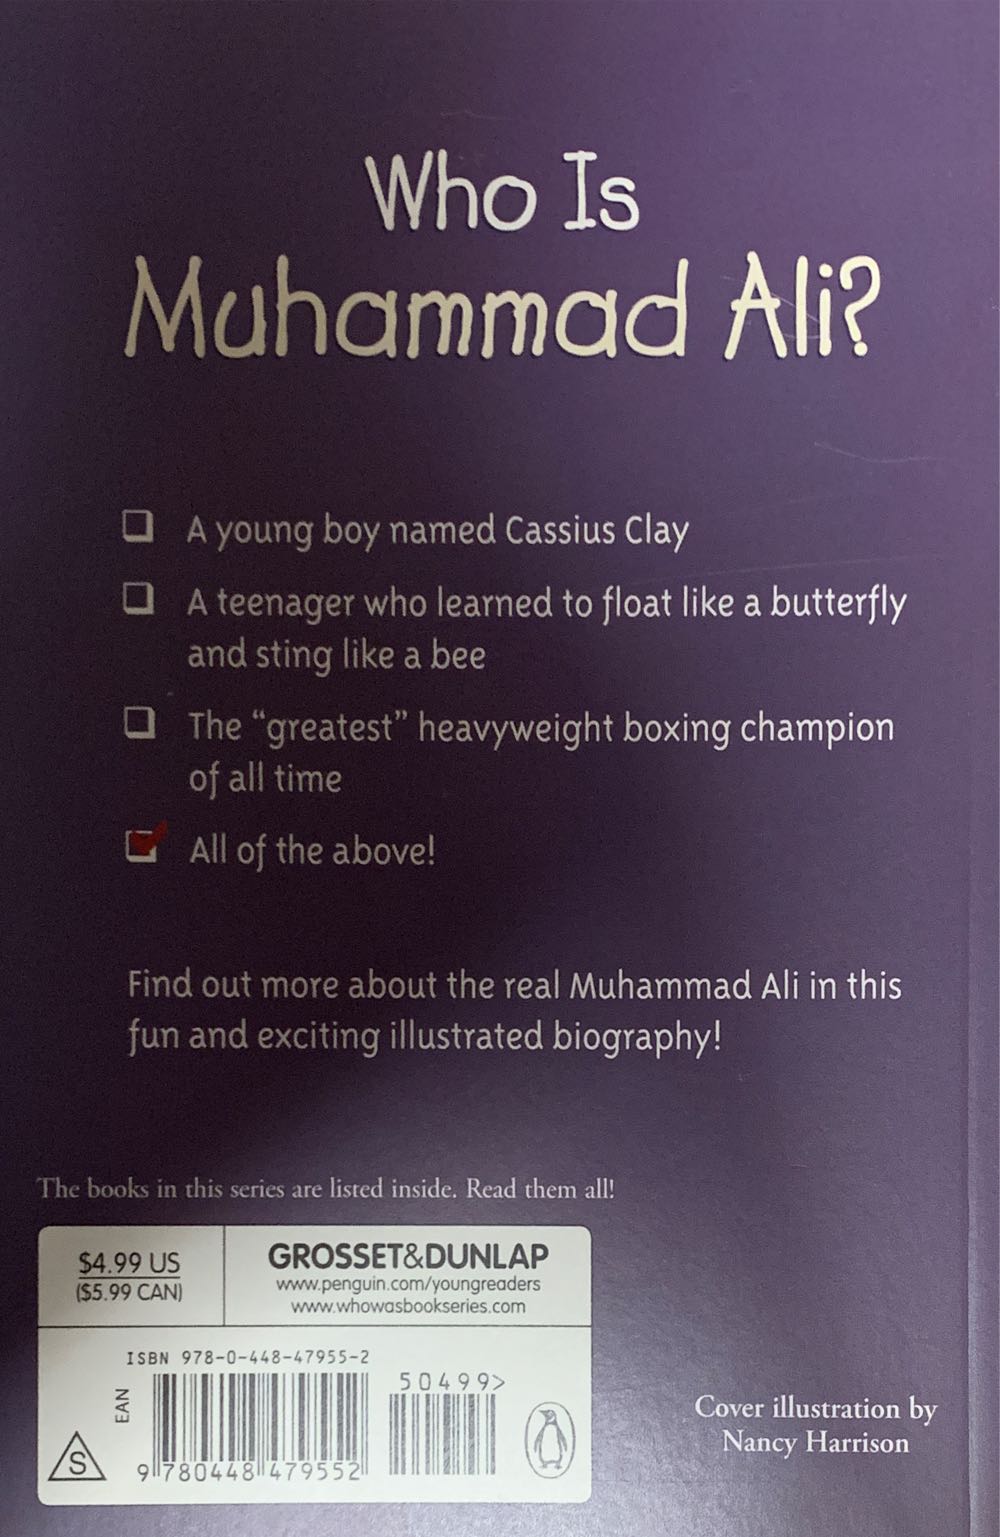 Who Was Muhammad Ali? - James, Jr. Buckley (Grosset & Dunlap - Paperback) book collectible [Barcode 9780448479552] - Main Image 2